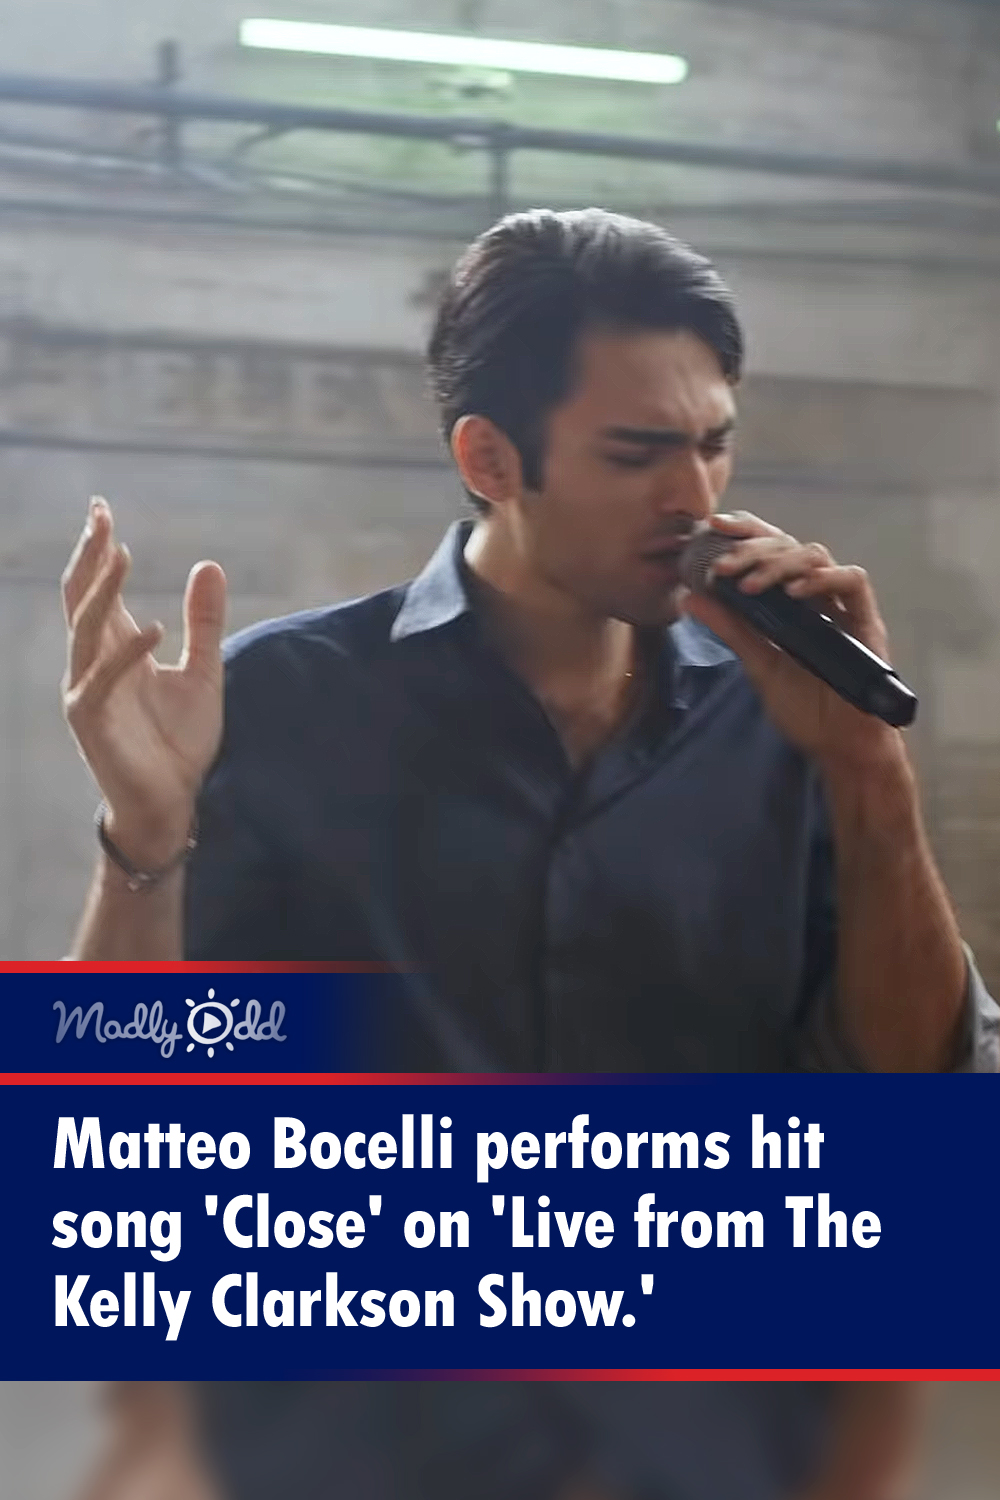 Matteo Bocelli performs hit song \'Close\' on \'Live from The Kelly Clarkson Show\'